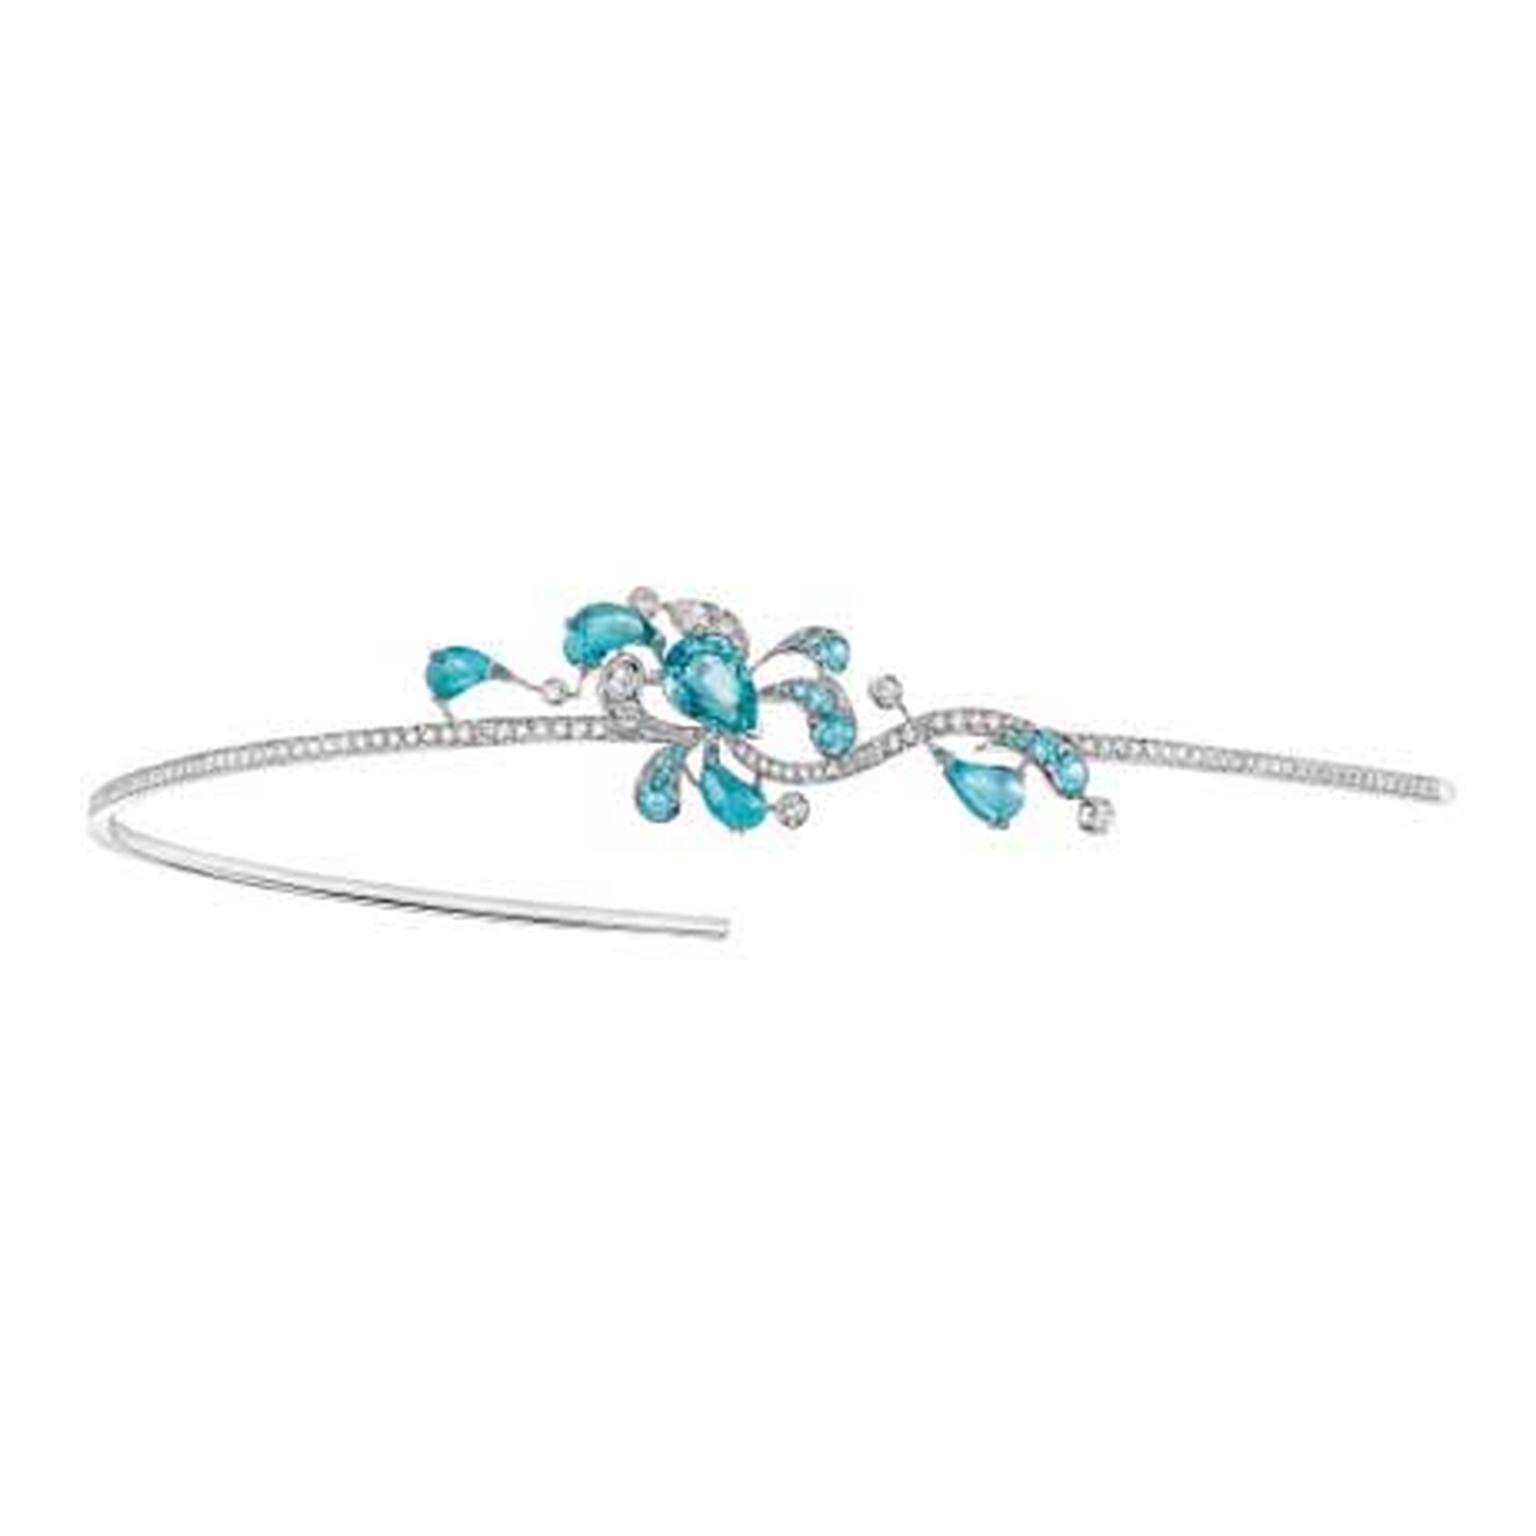 Chaumet hair ornament in white gold, set with diamonds and Paraiba-like tourmalines from Africa, from the Lumières d'Eau high jewellery collection.